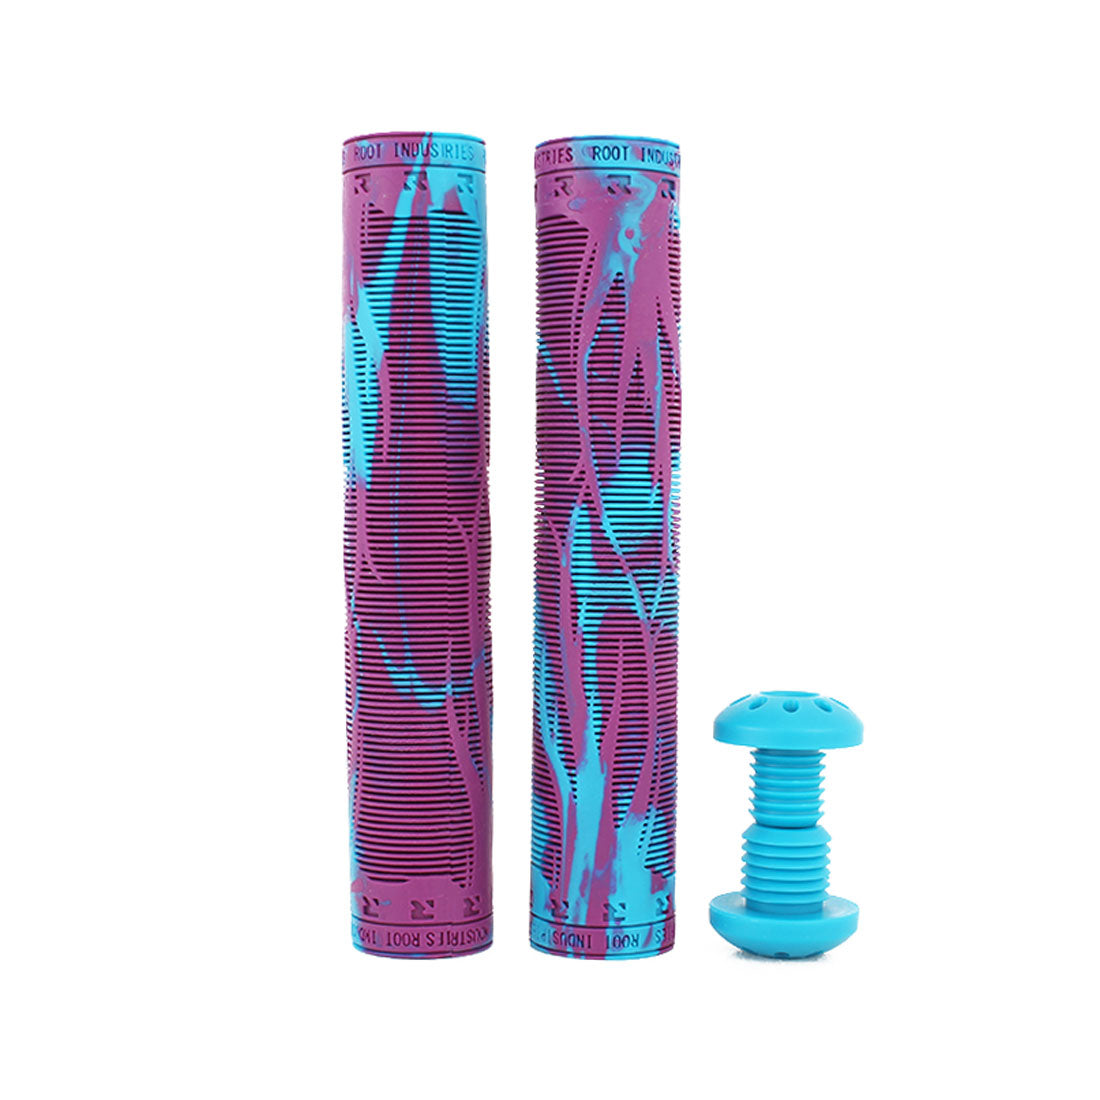 Root Industries R2 Air Grips - Aqua/Purple Scooter Grips